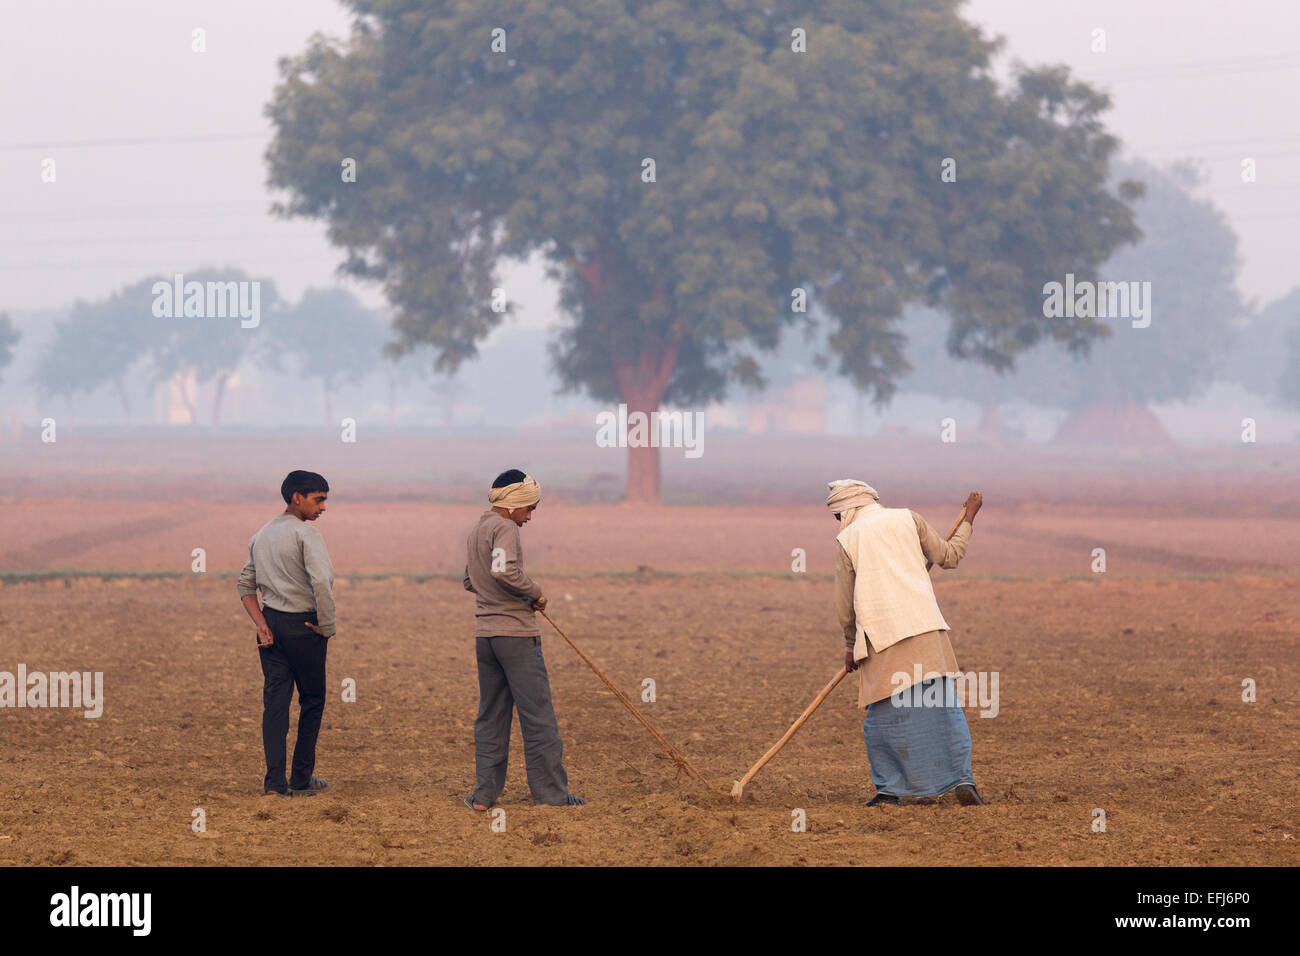 India, Uttar Pradesh, Agra, farmer hoeing his land with help from sons Stock Photo